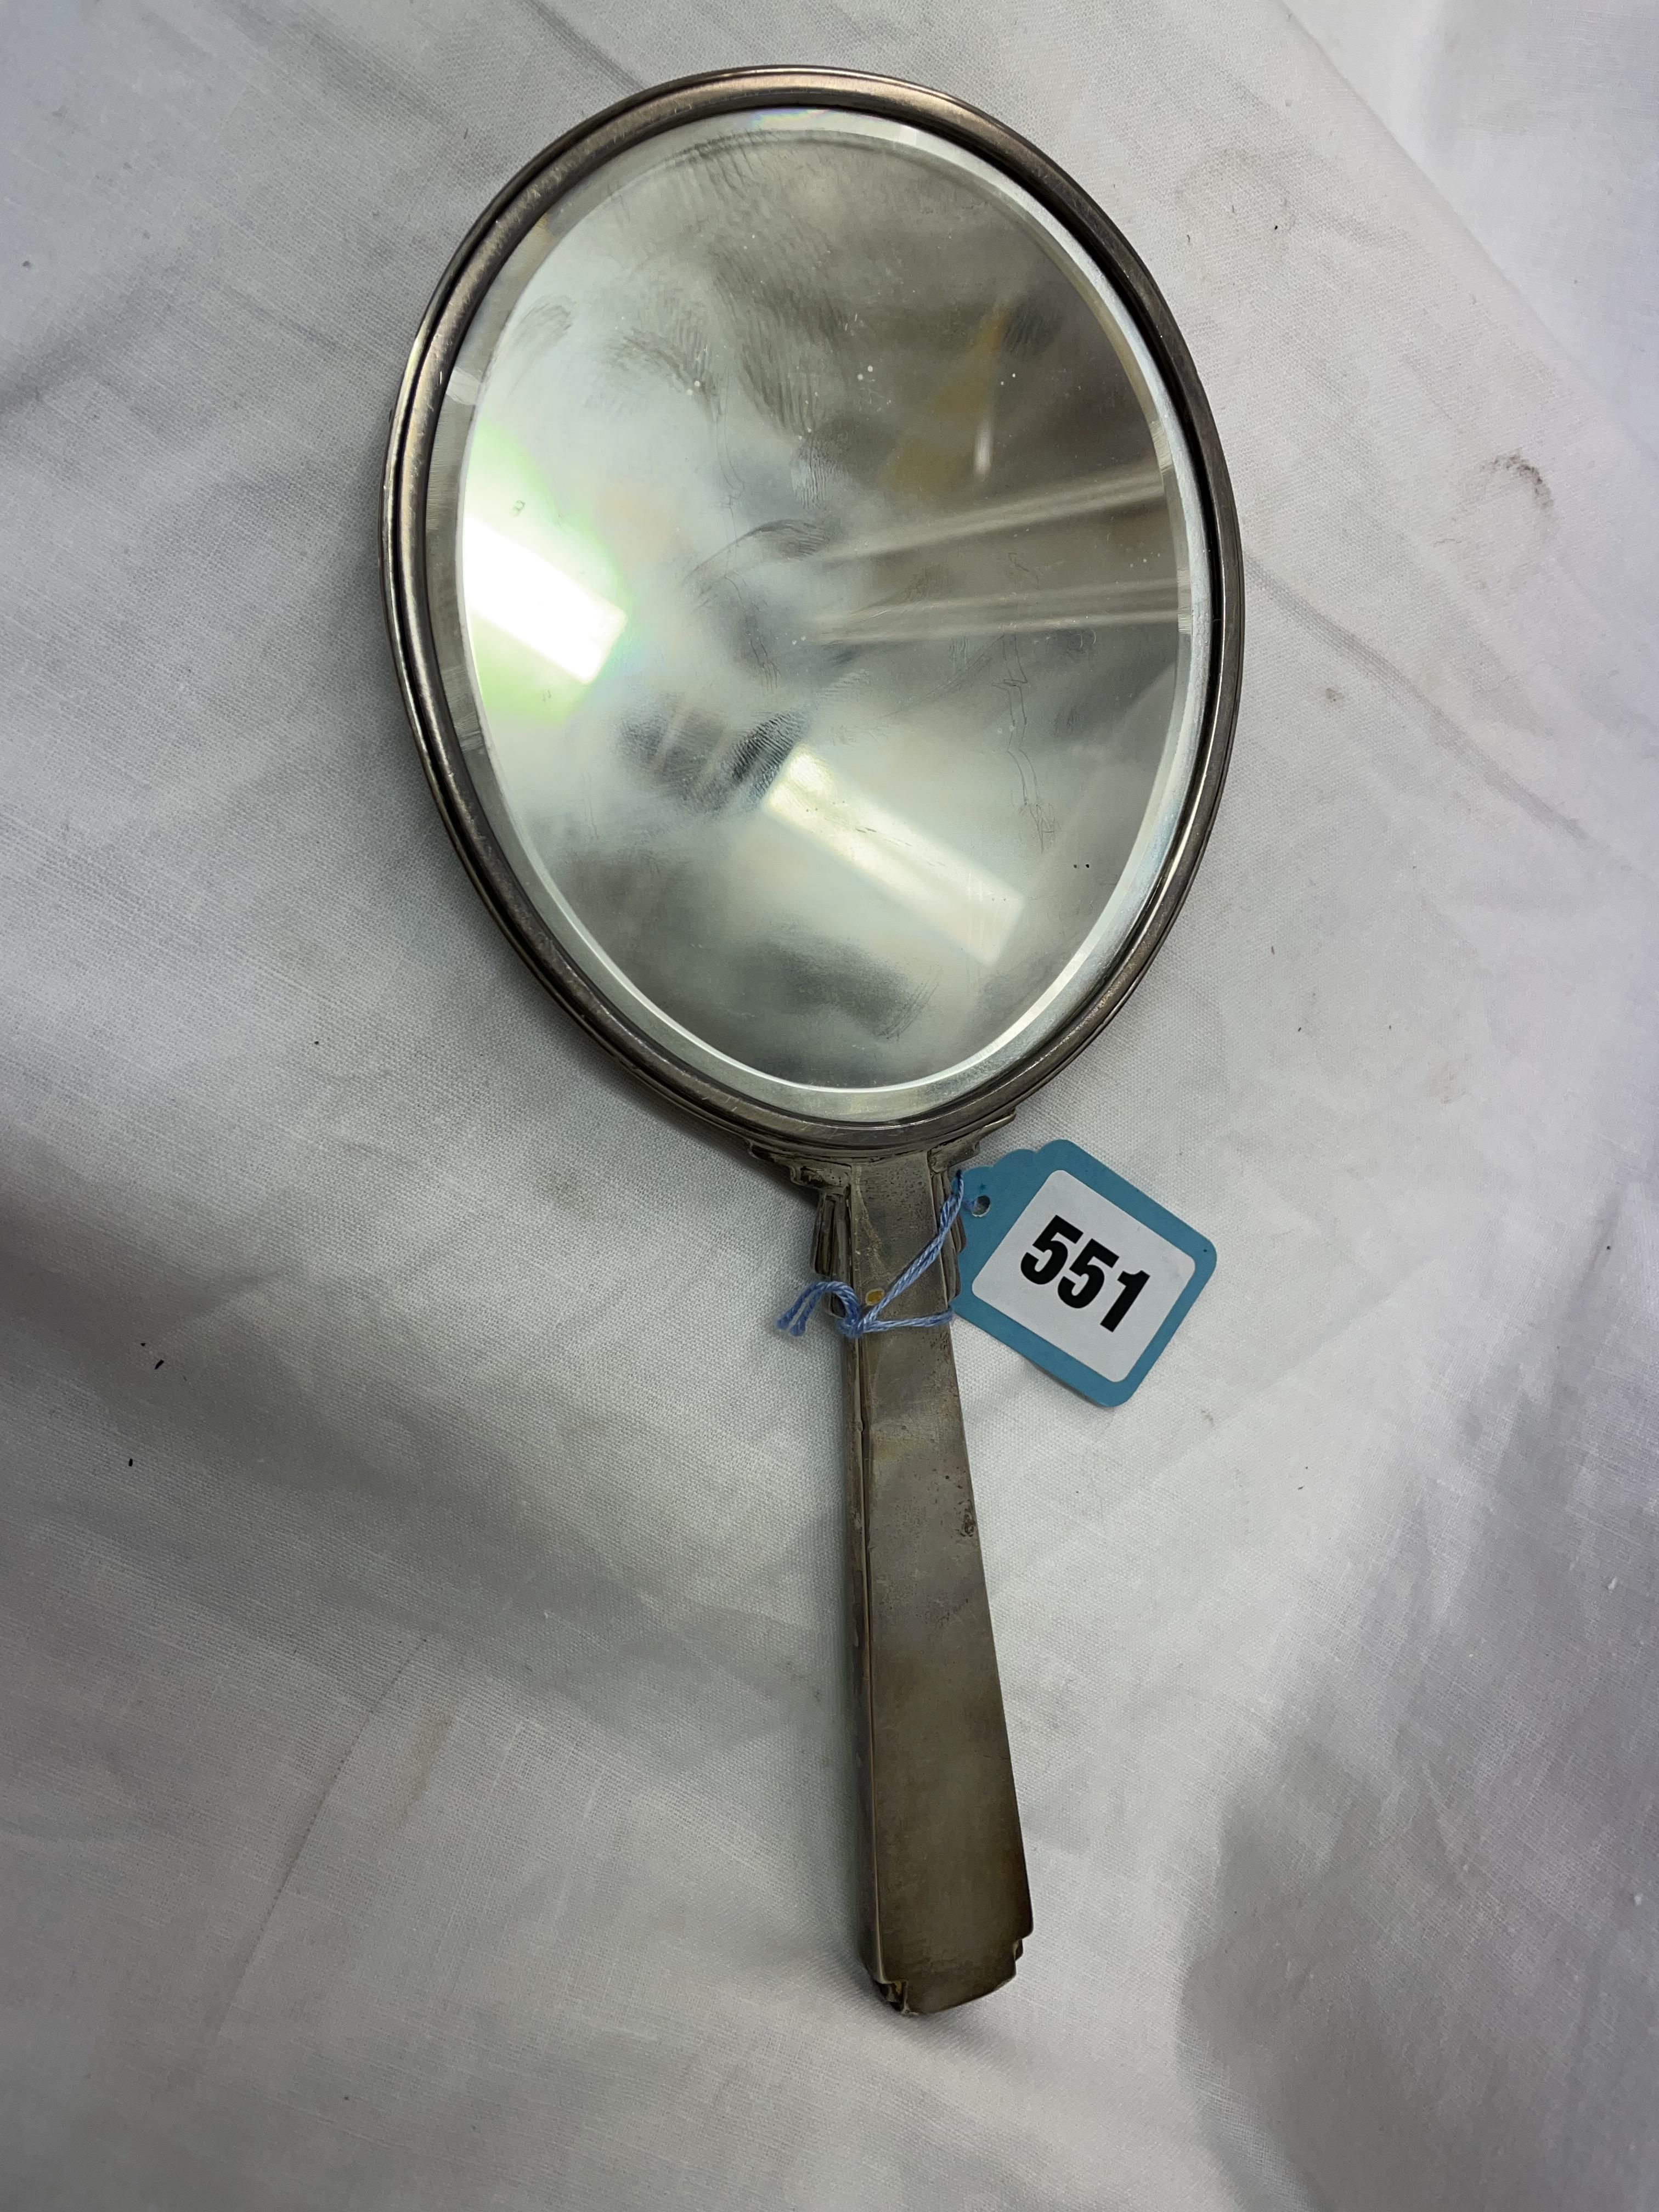 SILVER AND GUILLOCHE ENAMEL BACKED HAND MIRROR - Image 2 of 3